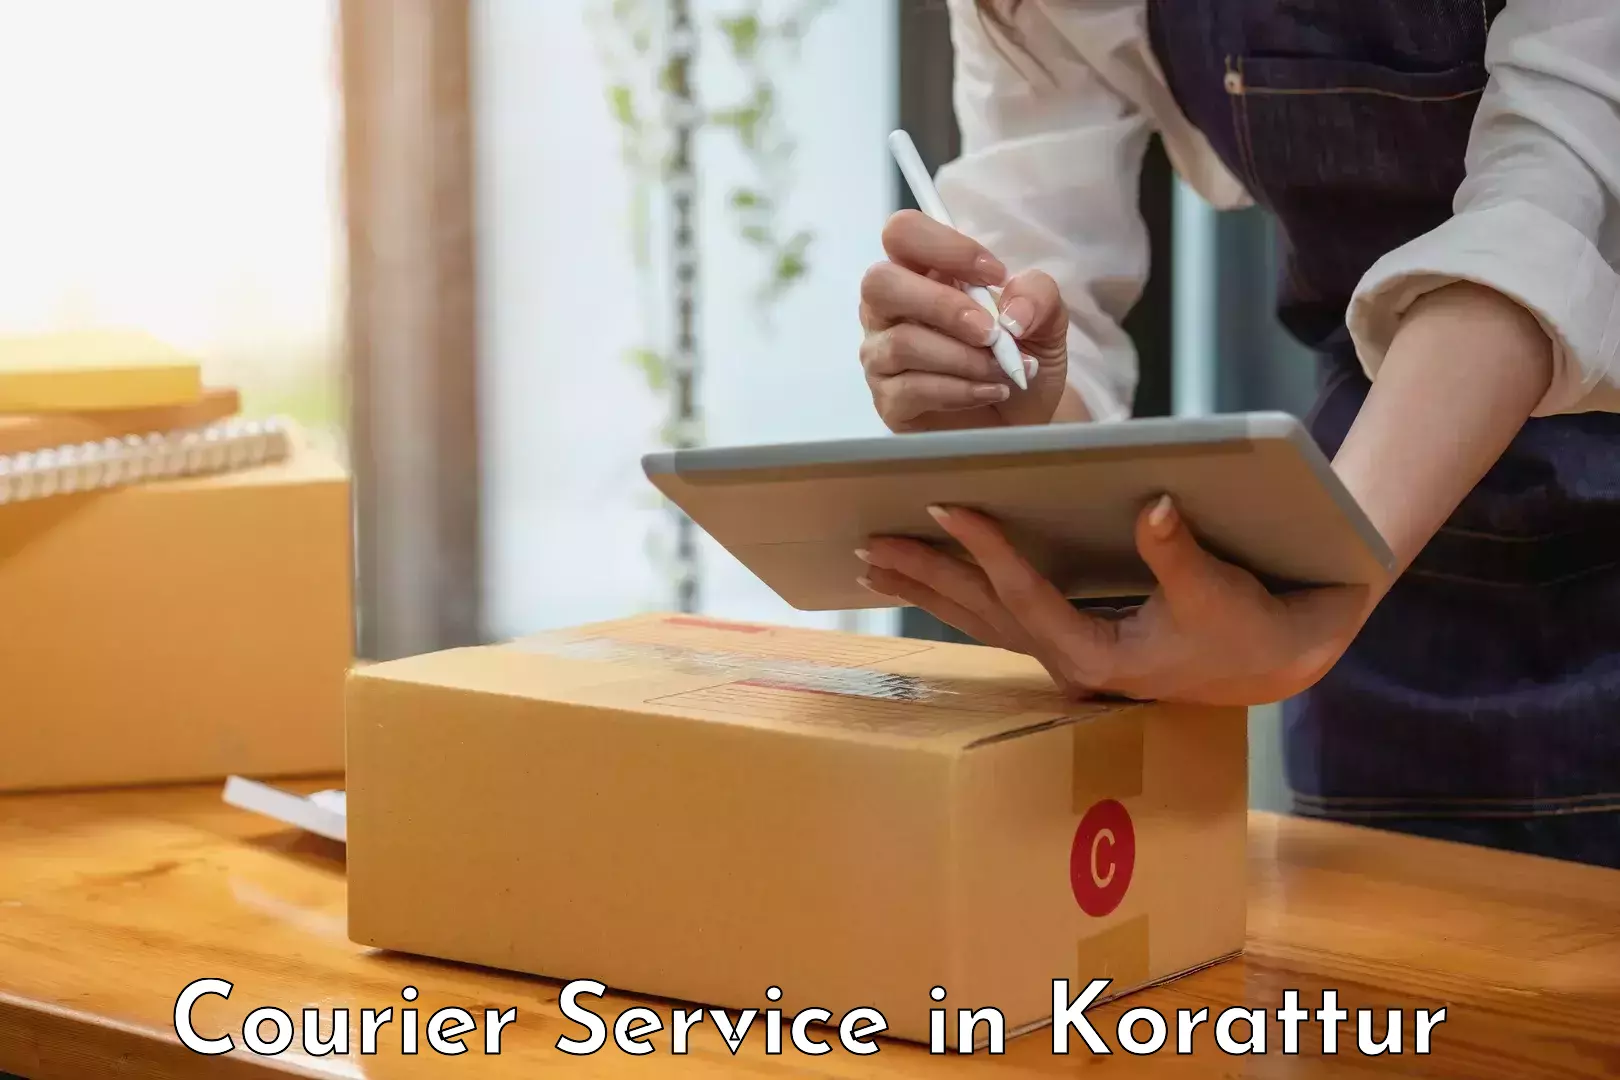 Quality courier services in Korattur